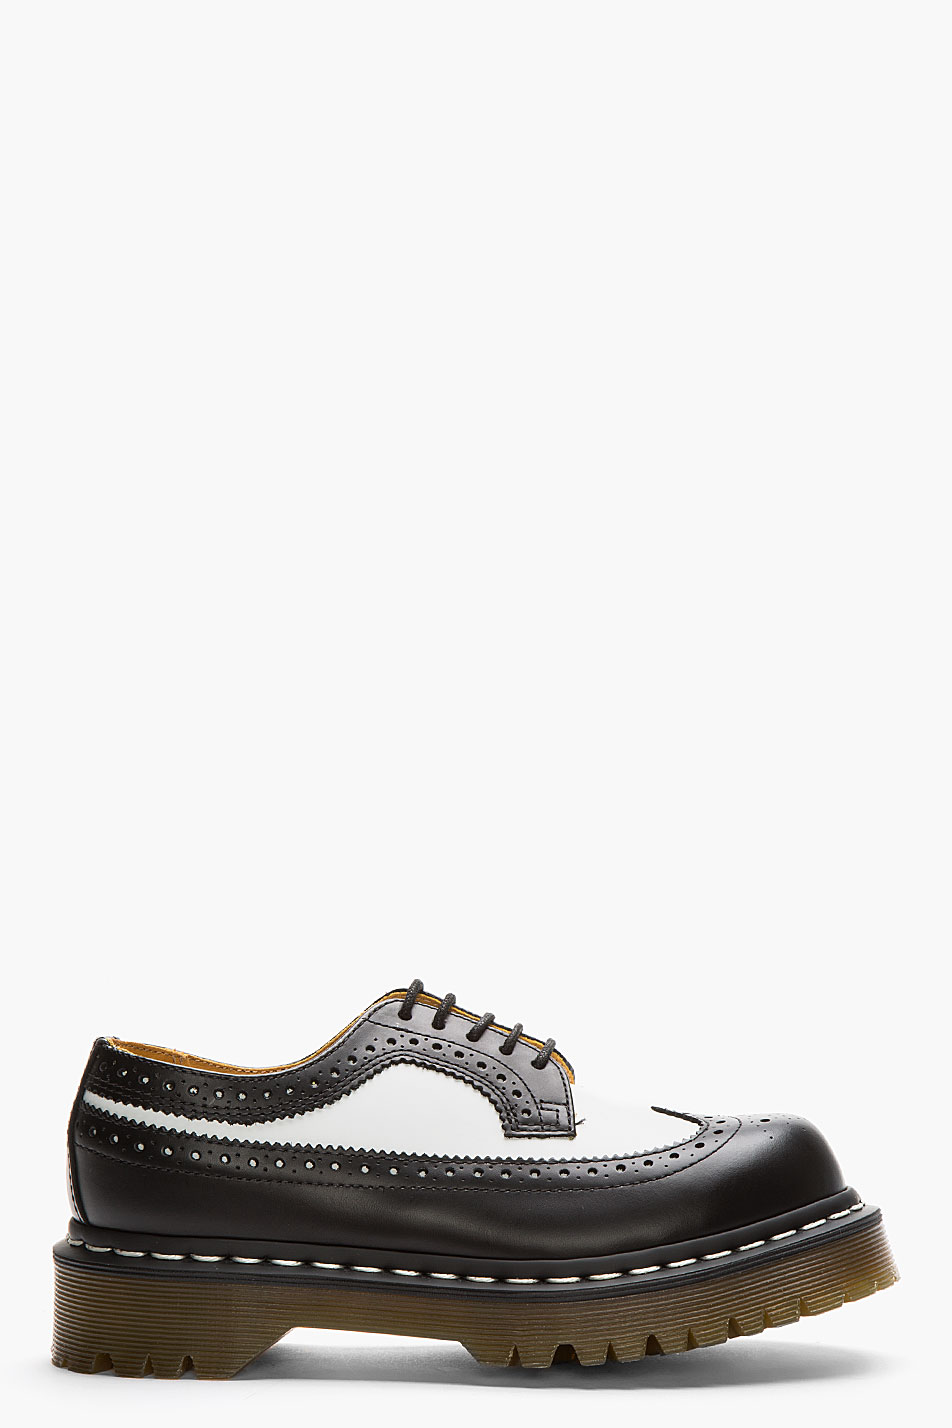 Lyst - Dr. Martens Black and White Leather 5-eye Long-wing Brogues in Black